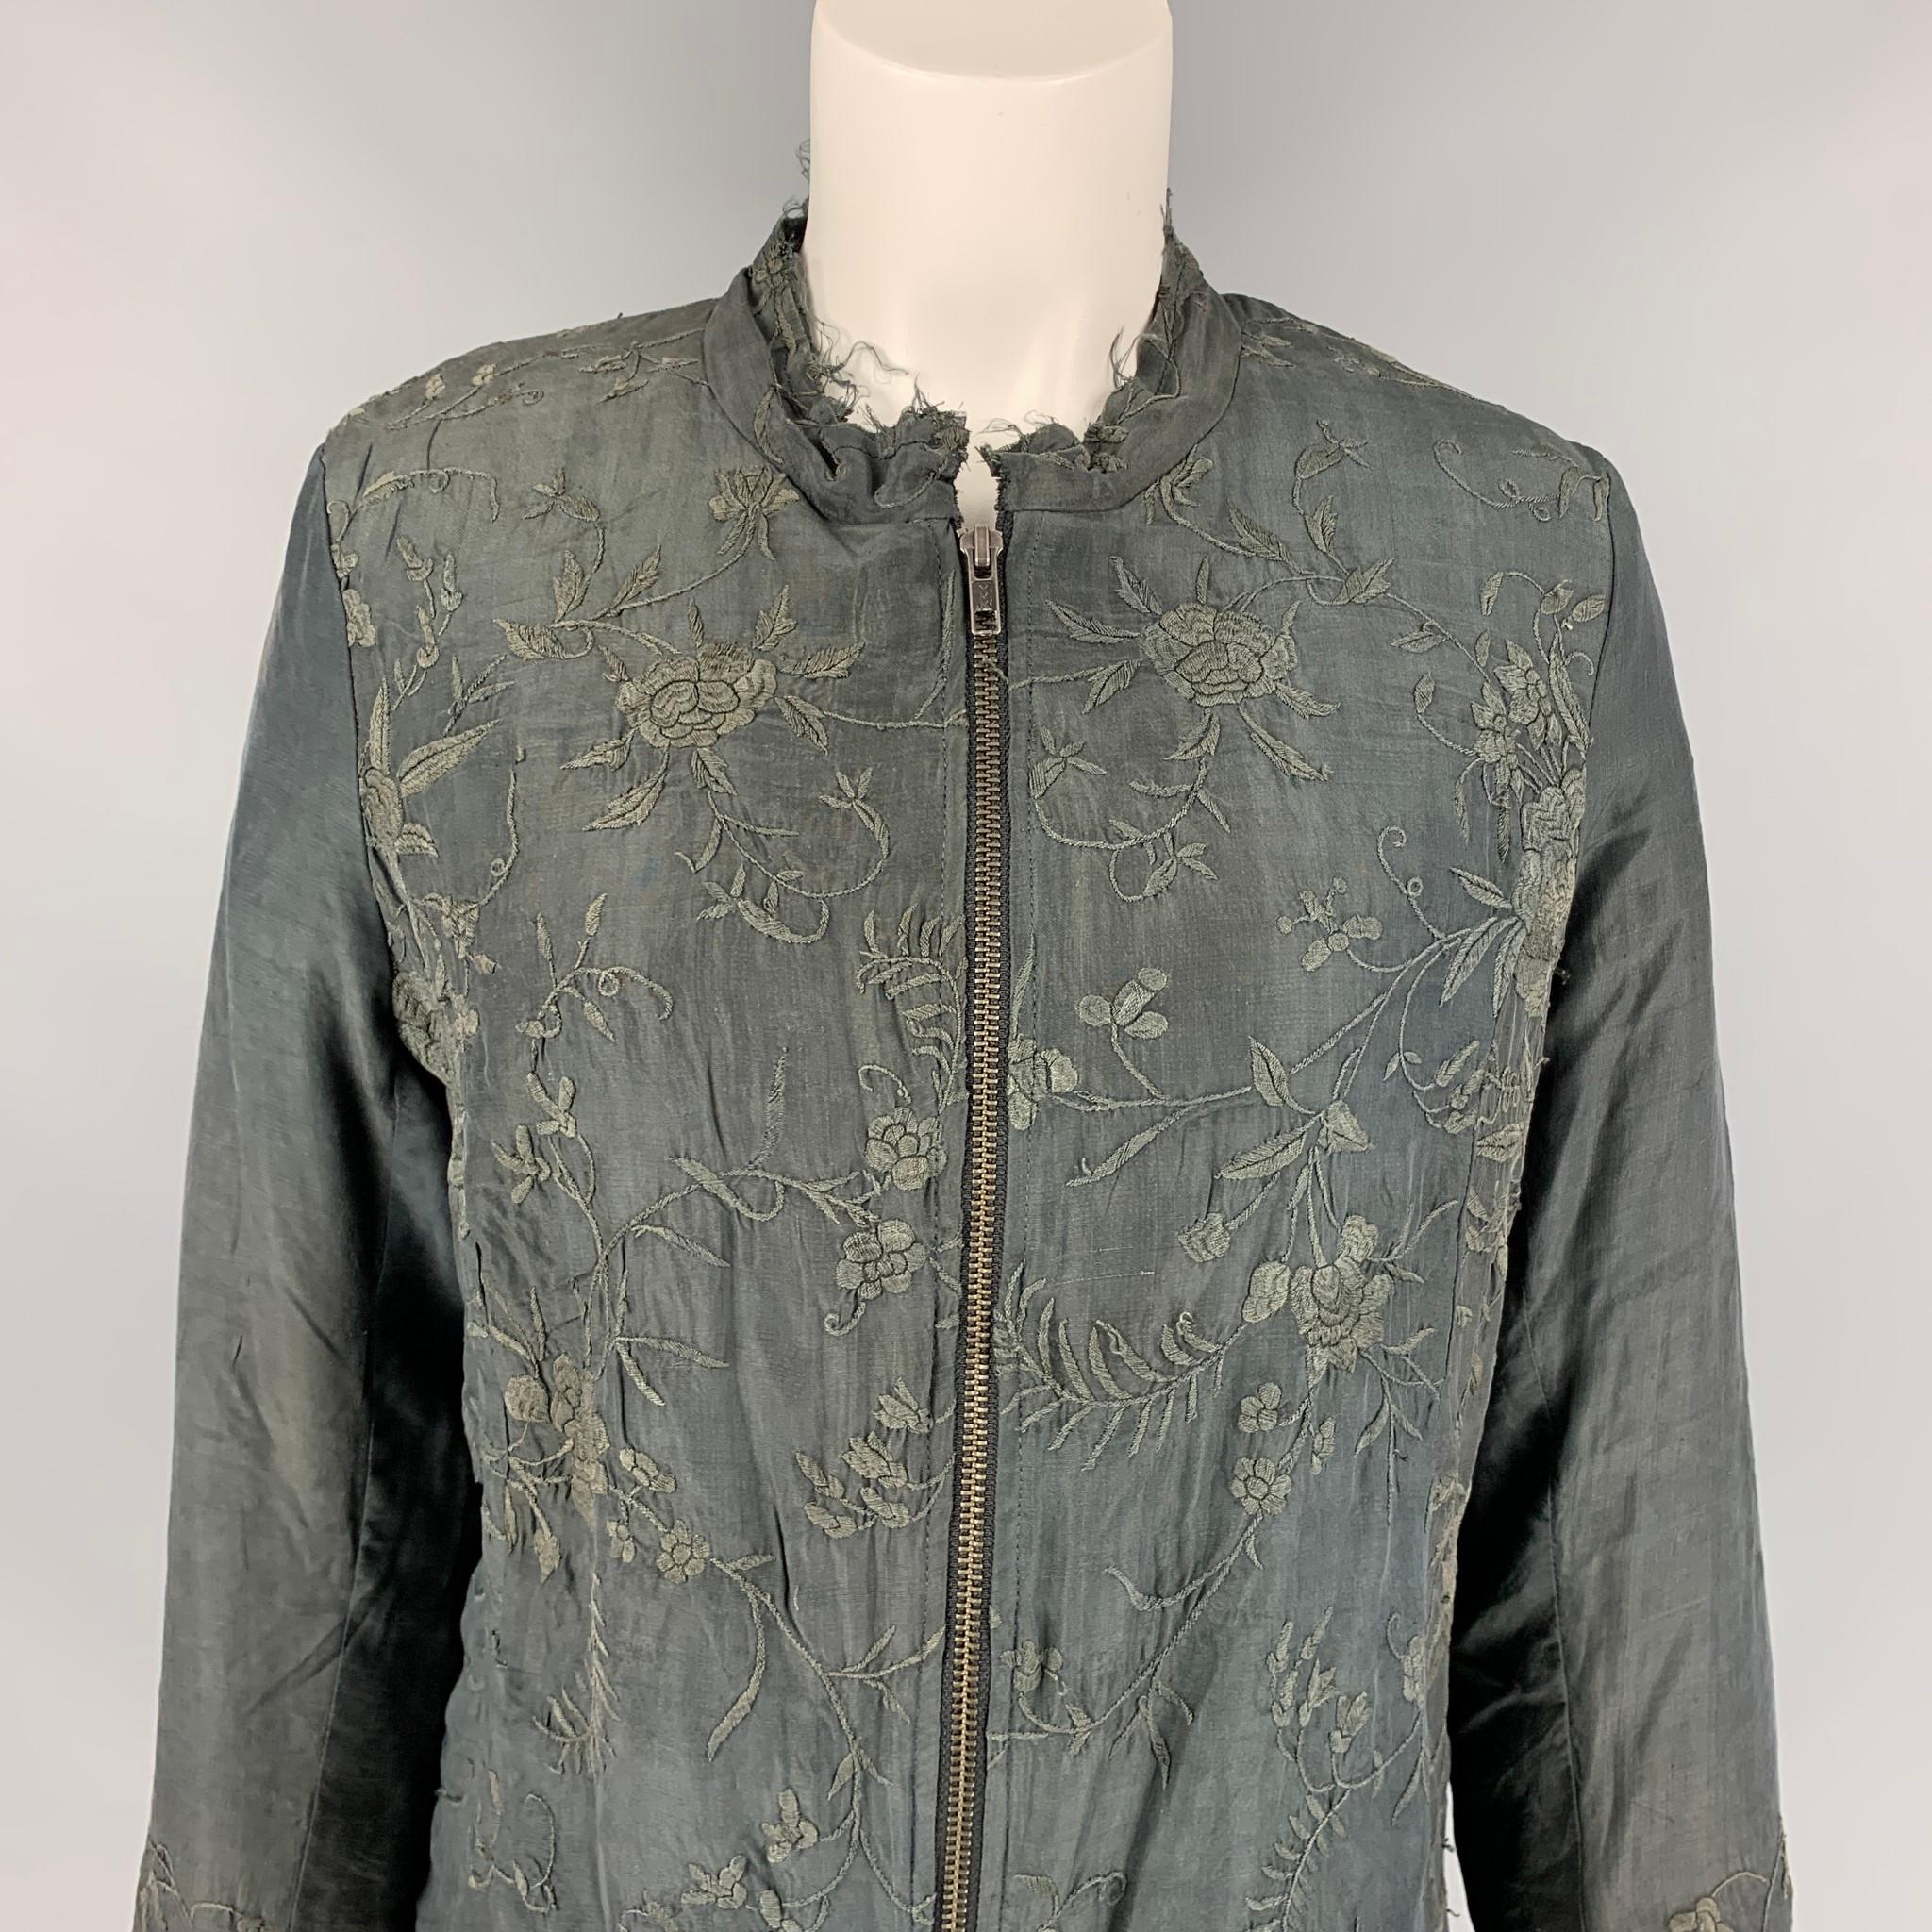 BY WALID jacket comes in a dark gray silk featuring embroidered design, raw edge, slit pockets, and a zip up closure. Made in UK. 

Very Good Pre-Owned Condition.
Marked: M

Measurements:

Shoulder: 16 in.
Bust: 40 in.
Sleeve: 25 in.
Length: 23.5